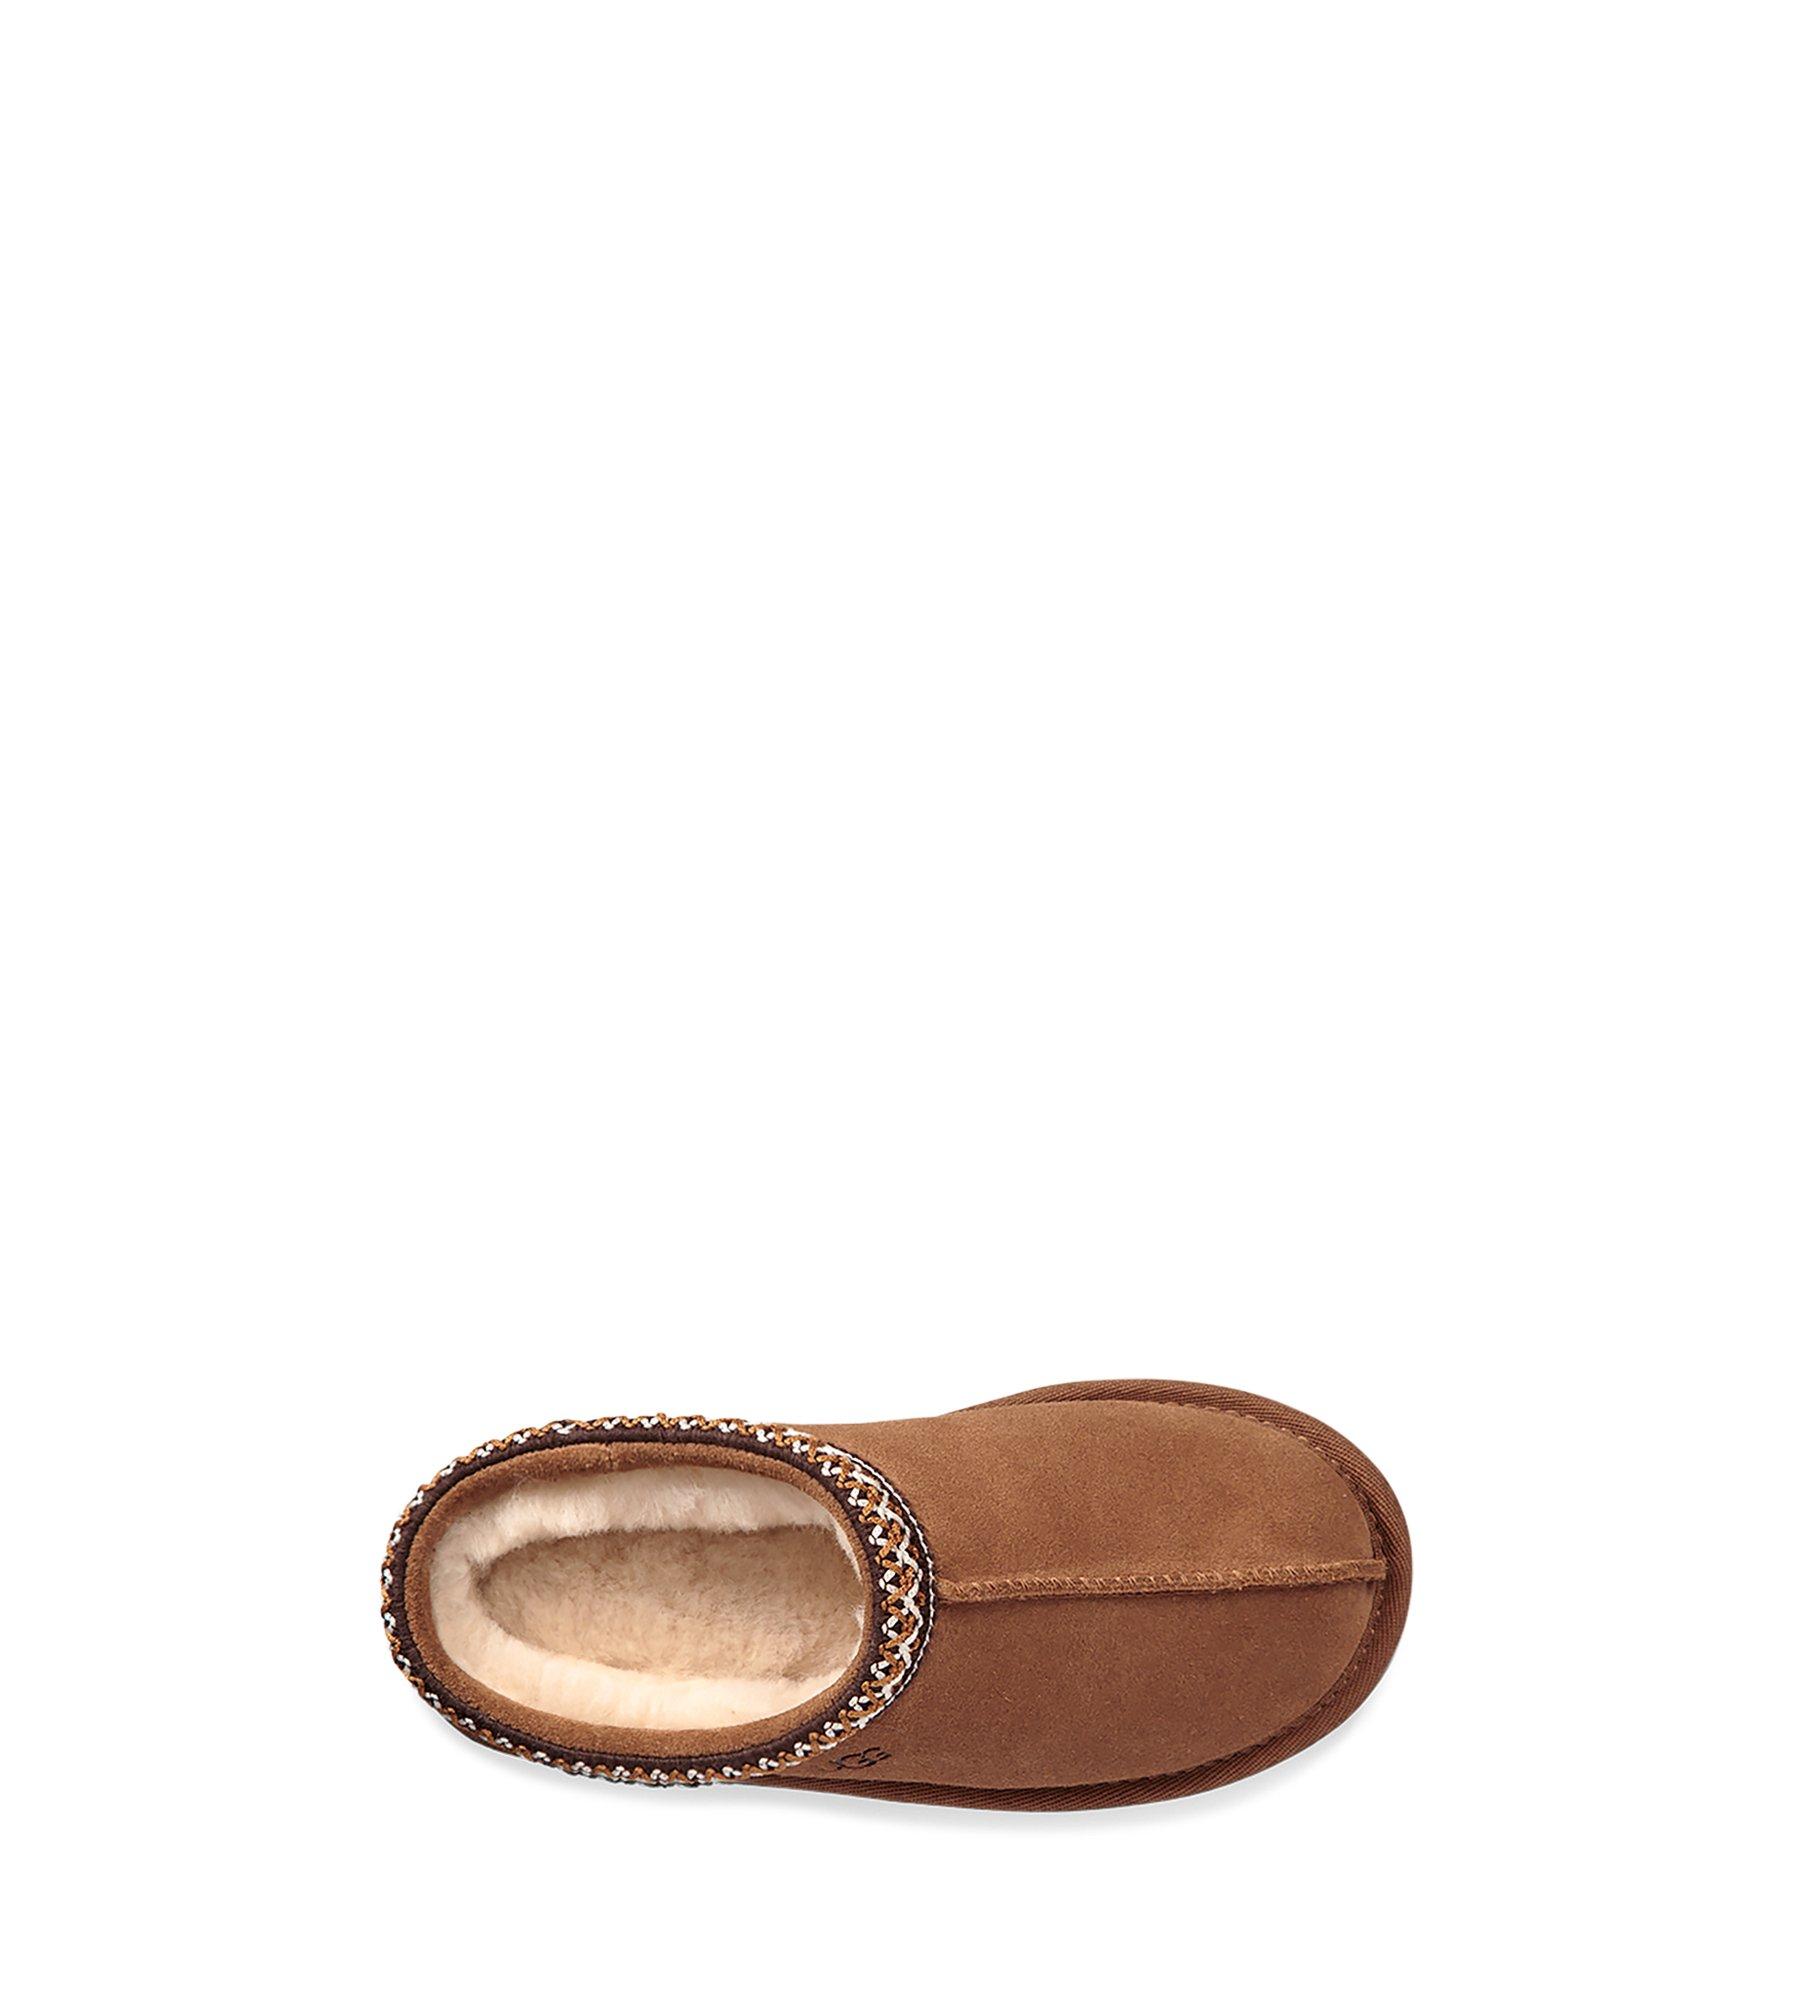 unbox my ugg tasman slippers with me! these are my favorite fall